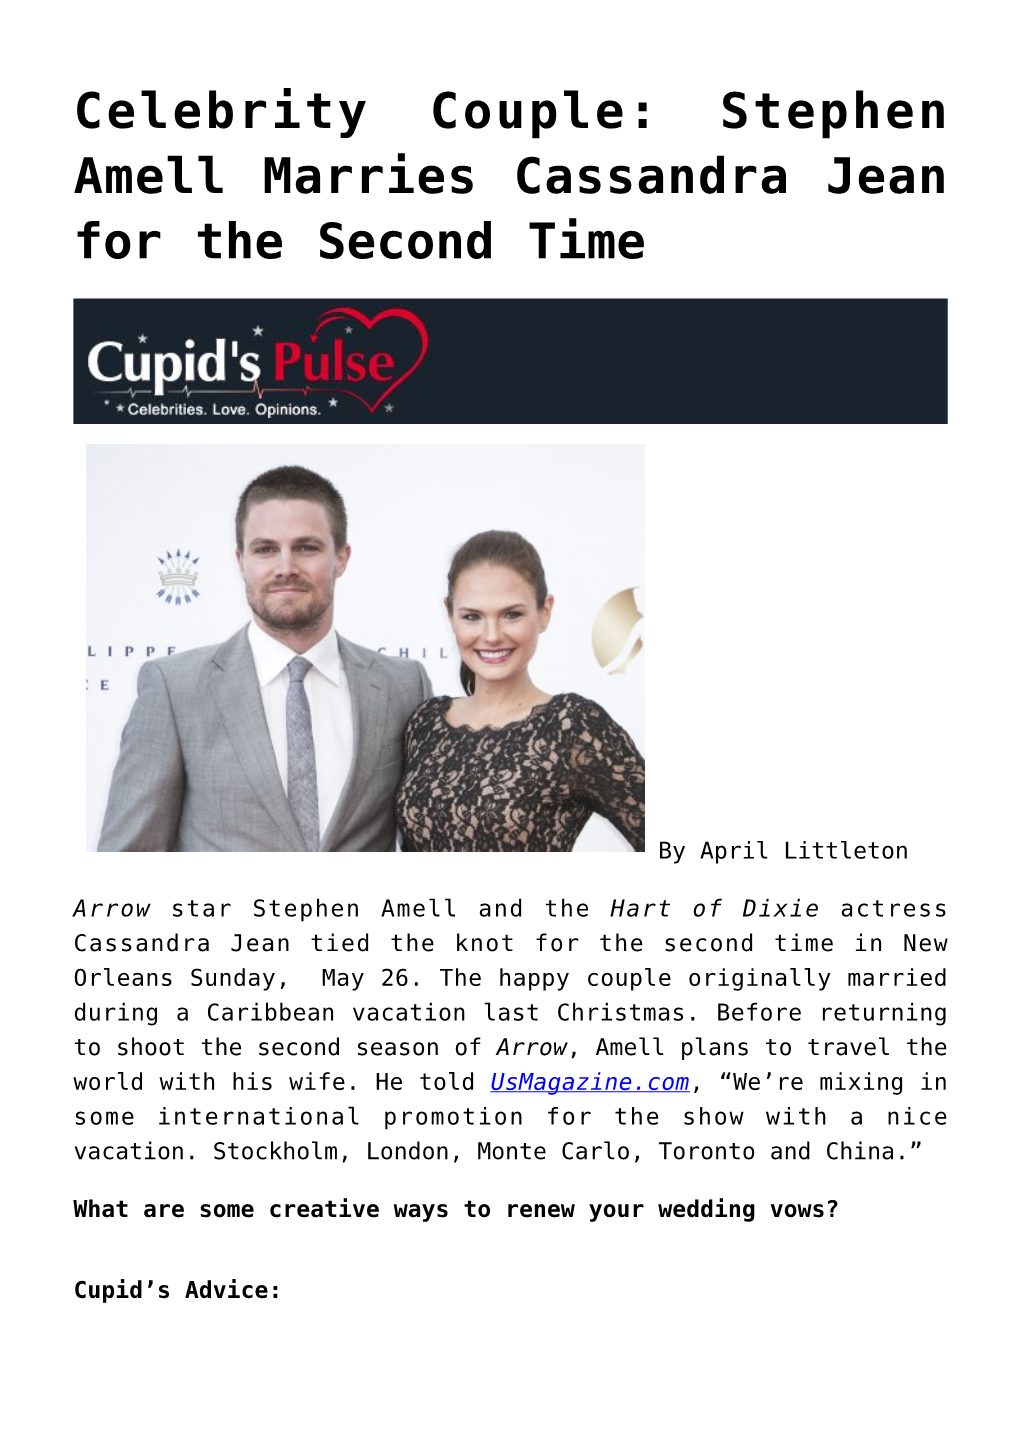 Stephen Amell Marries Cassandra Jean for the Second Time